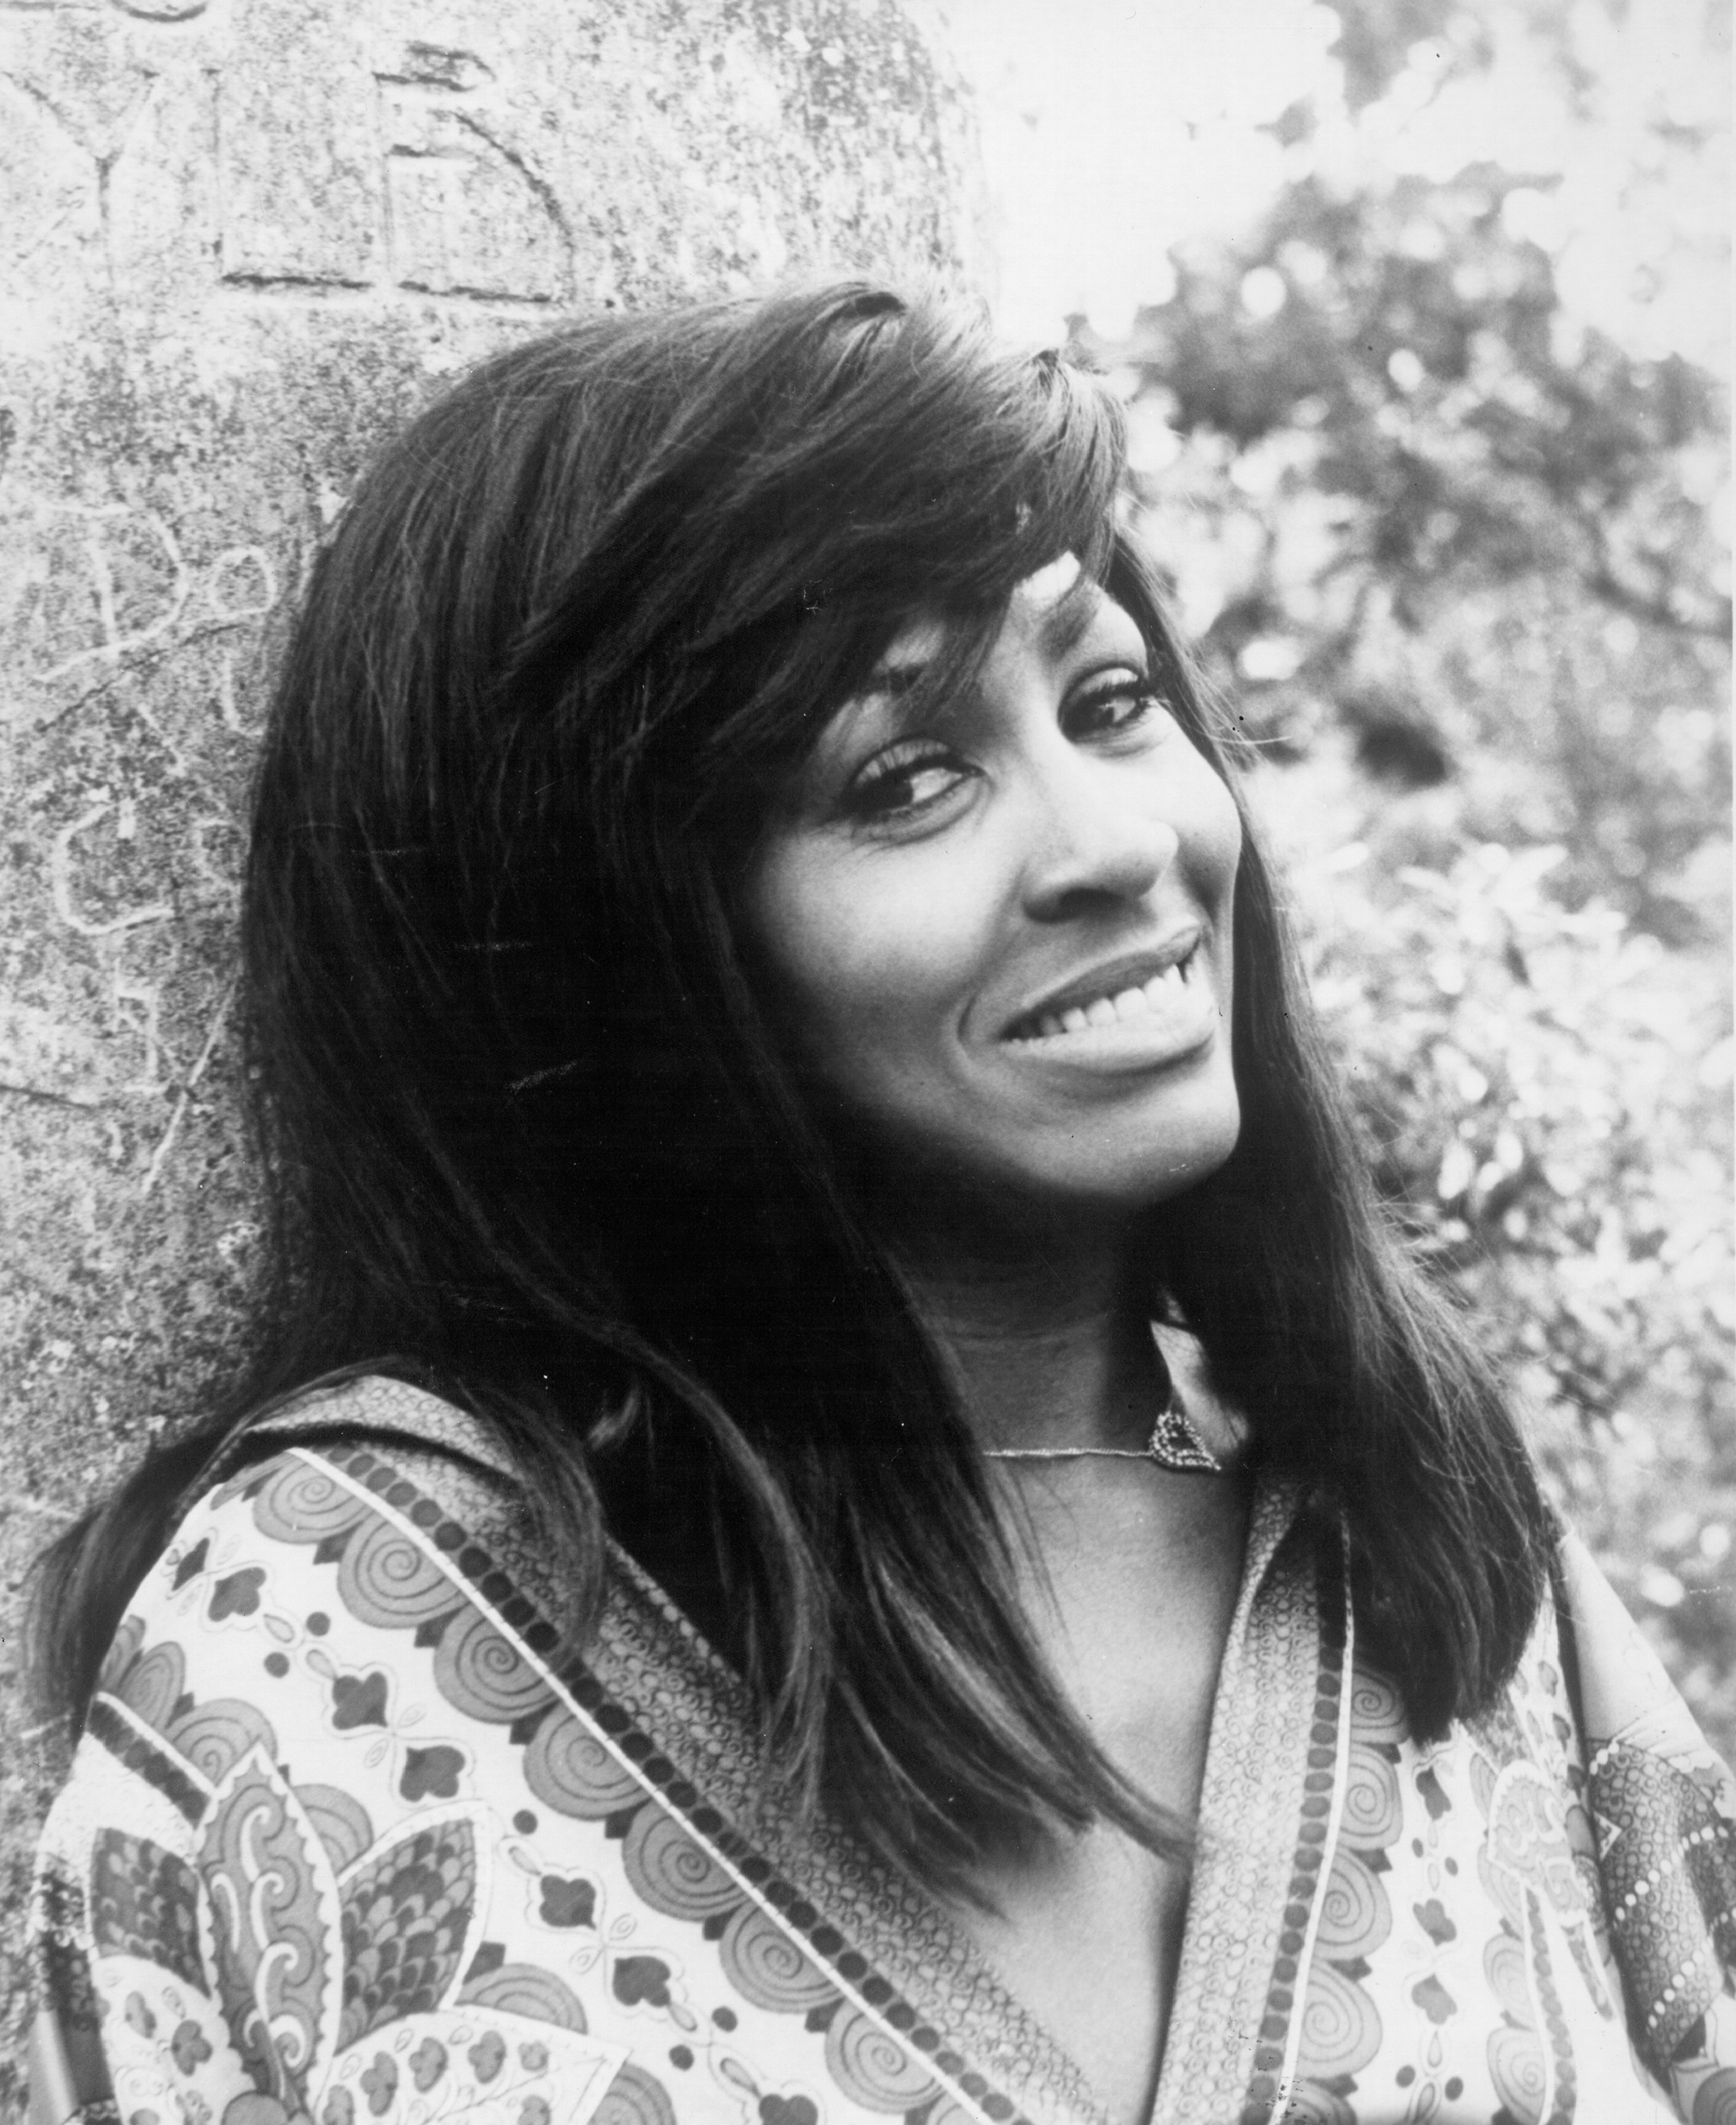 Tina Turner posing for a black-and-white portrait in 1971 | Source: Getty Images